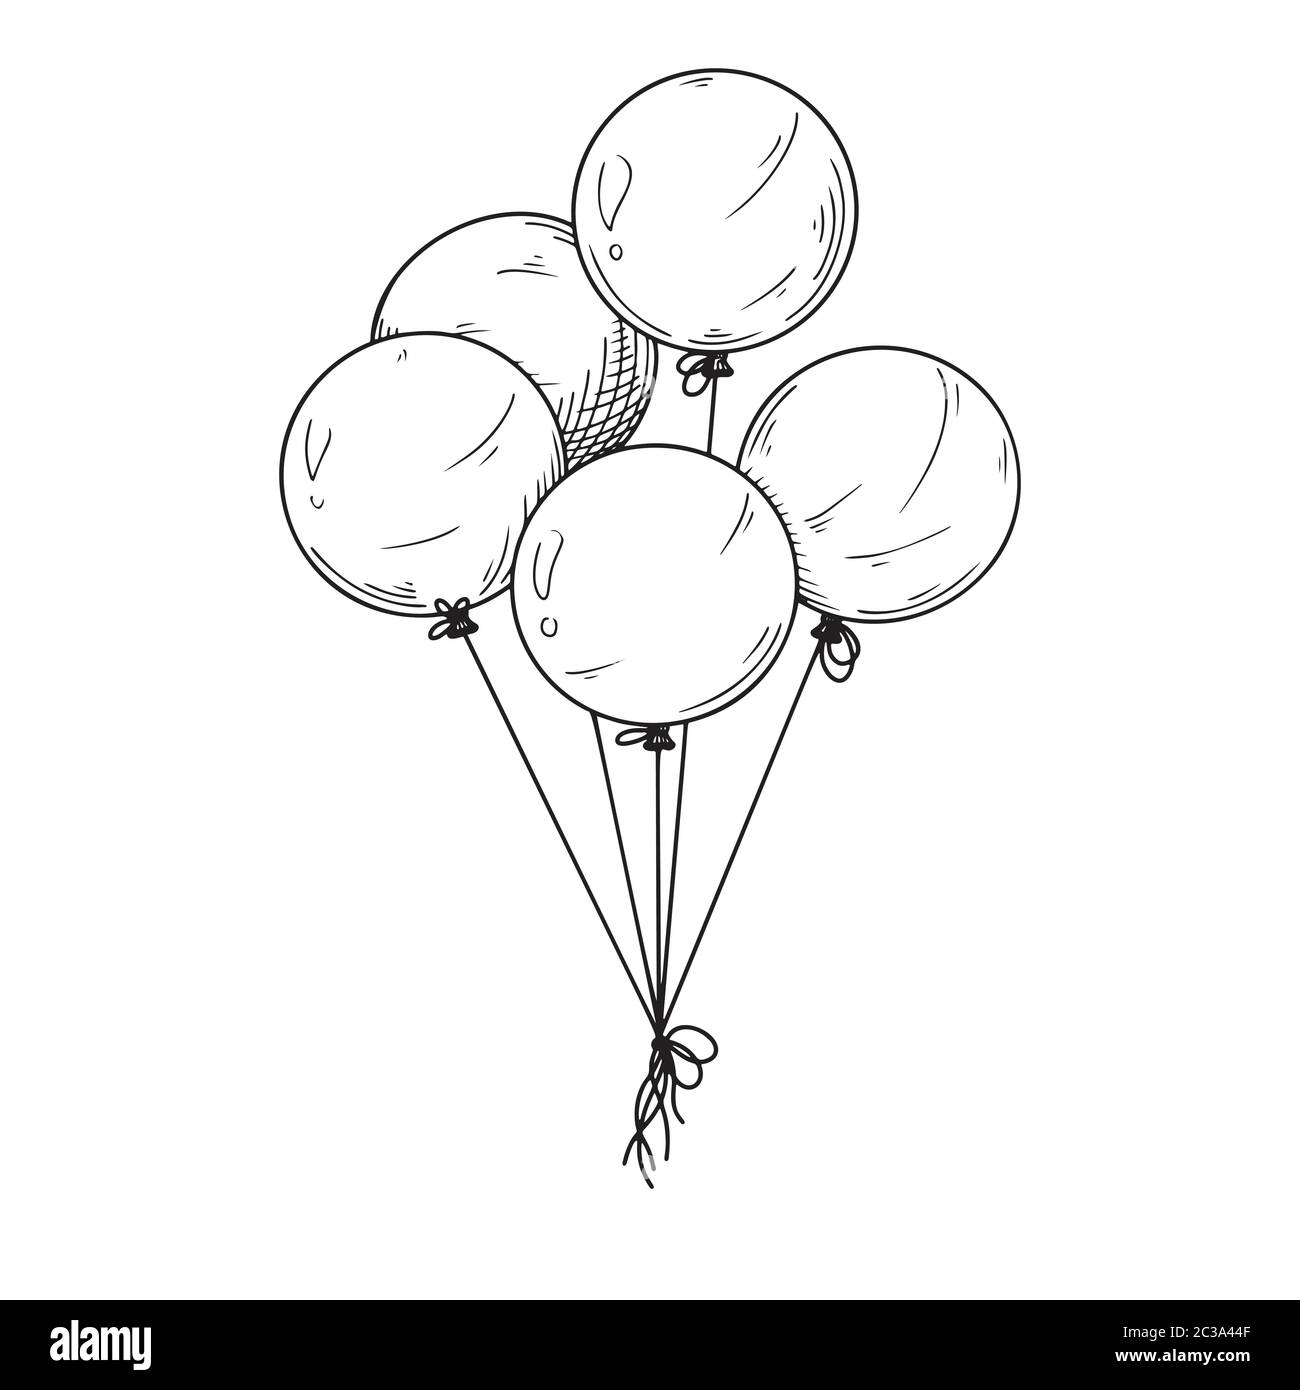 https://c8.alamy.com/comp/2C3A44F/different-balloons-inflatable-balls-on-a-string-vector-illustration-in-sketch-style-2C3A44F.jpg